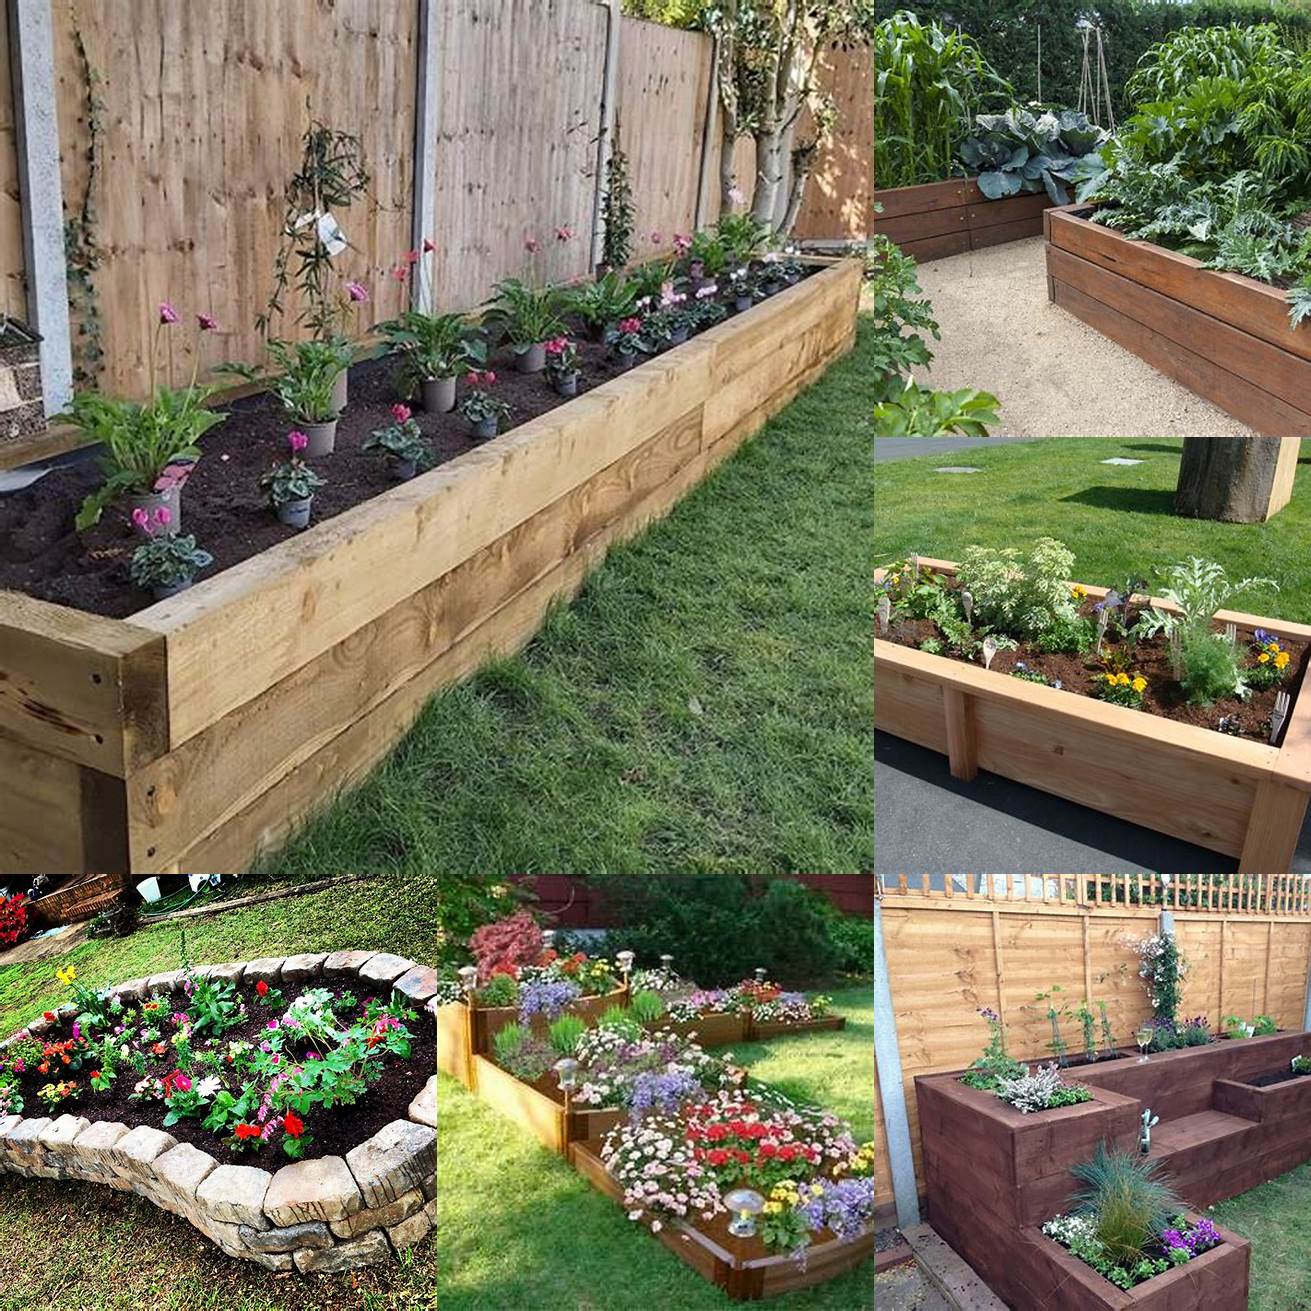 A raised flower bed can add dimension to your garden